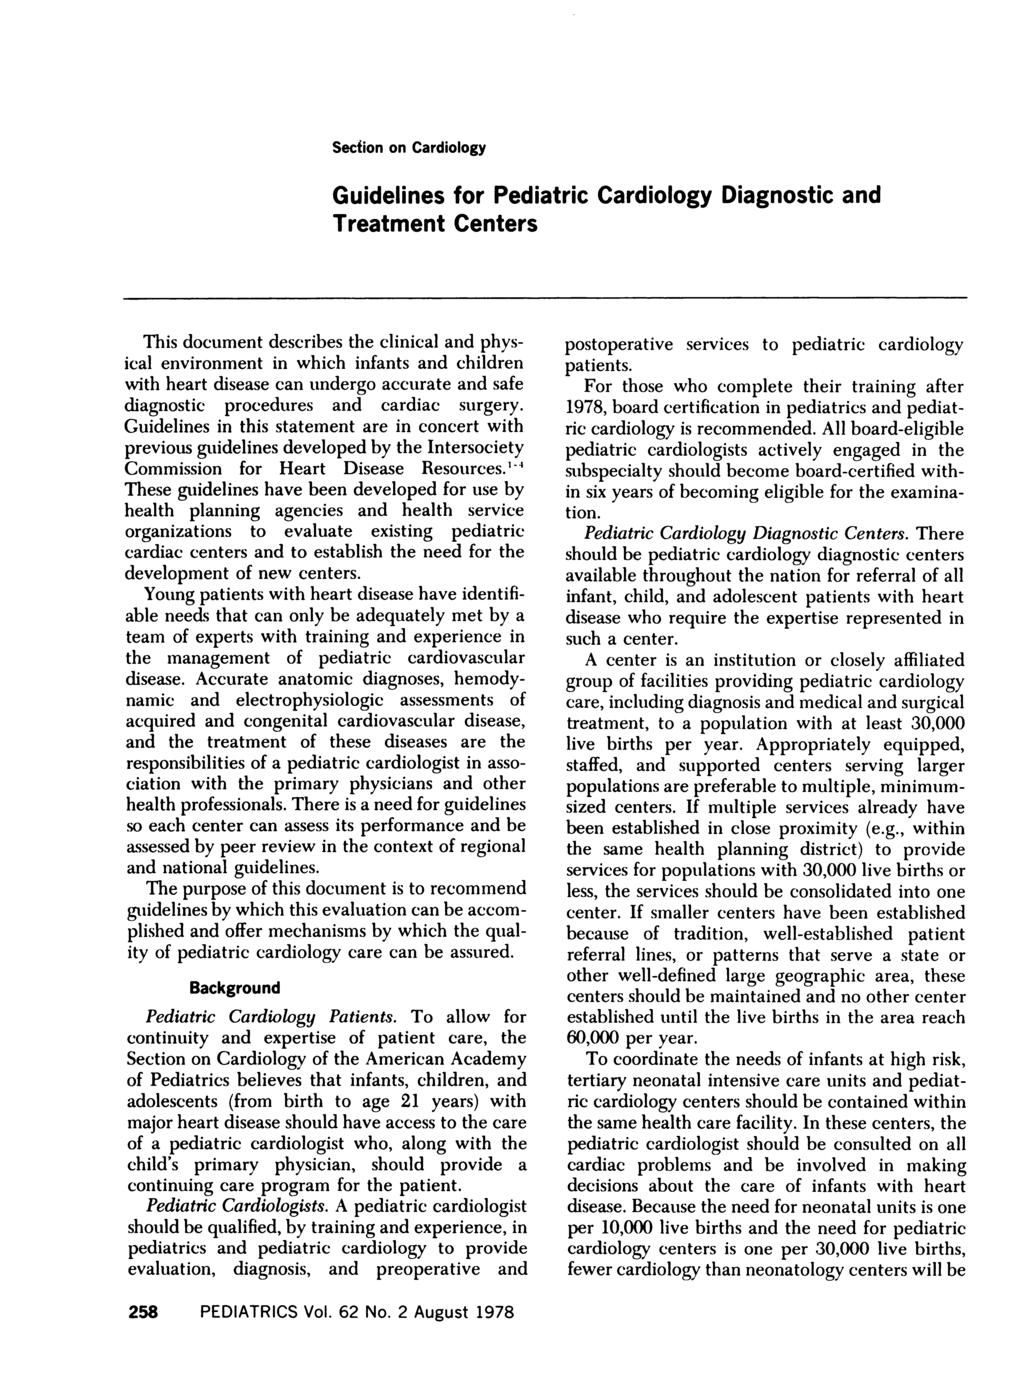 Section on Cardiology Guidelines for Pediatric Cardiology Diagnostic and Treatment Centers This document describes the clinical and physical environment in which infants and children with heart